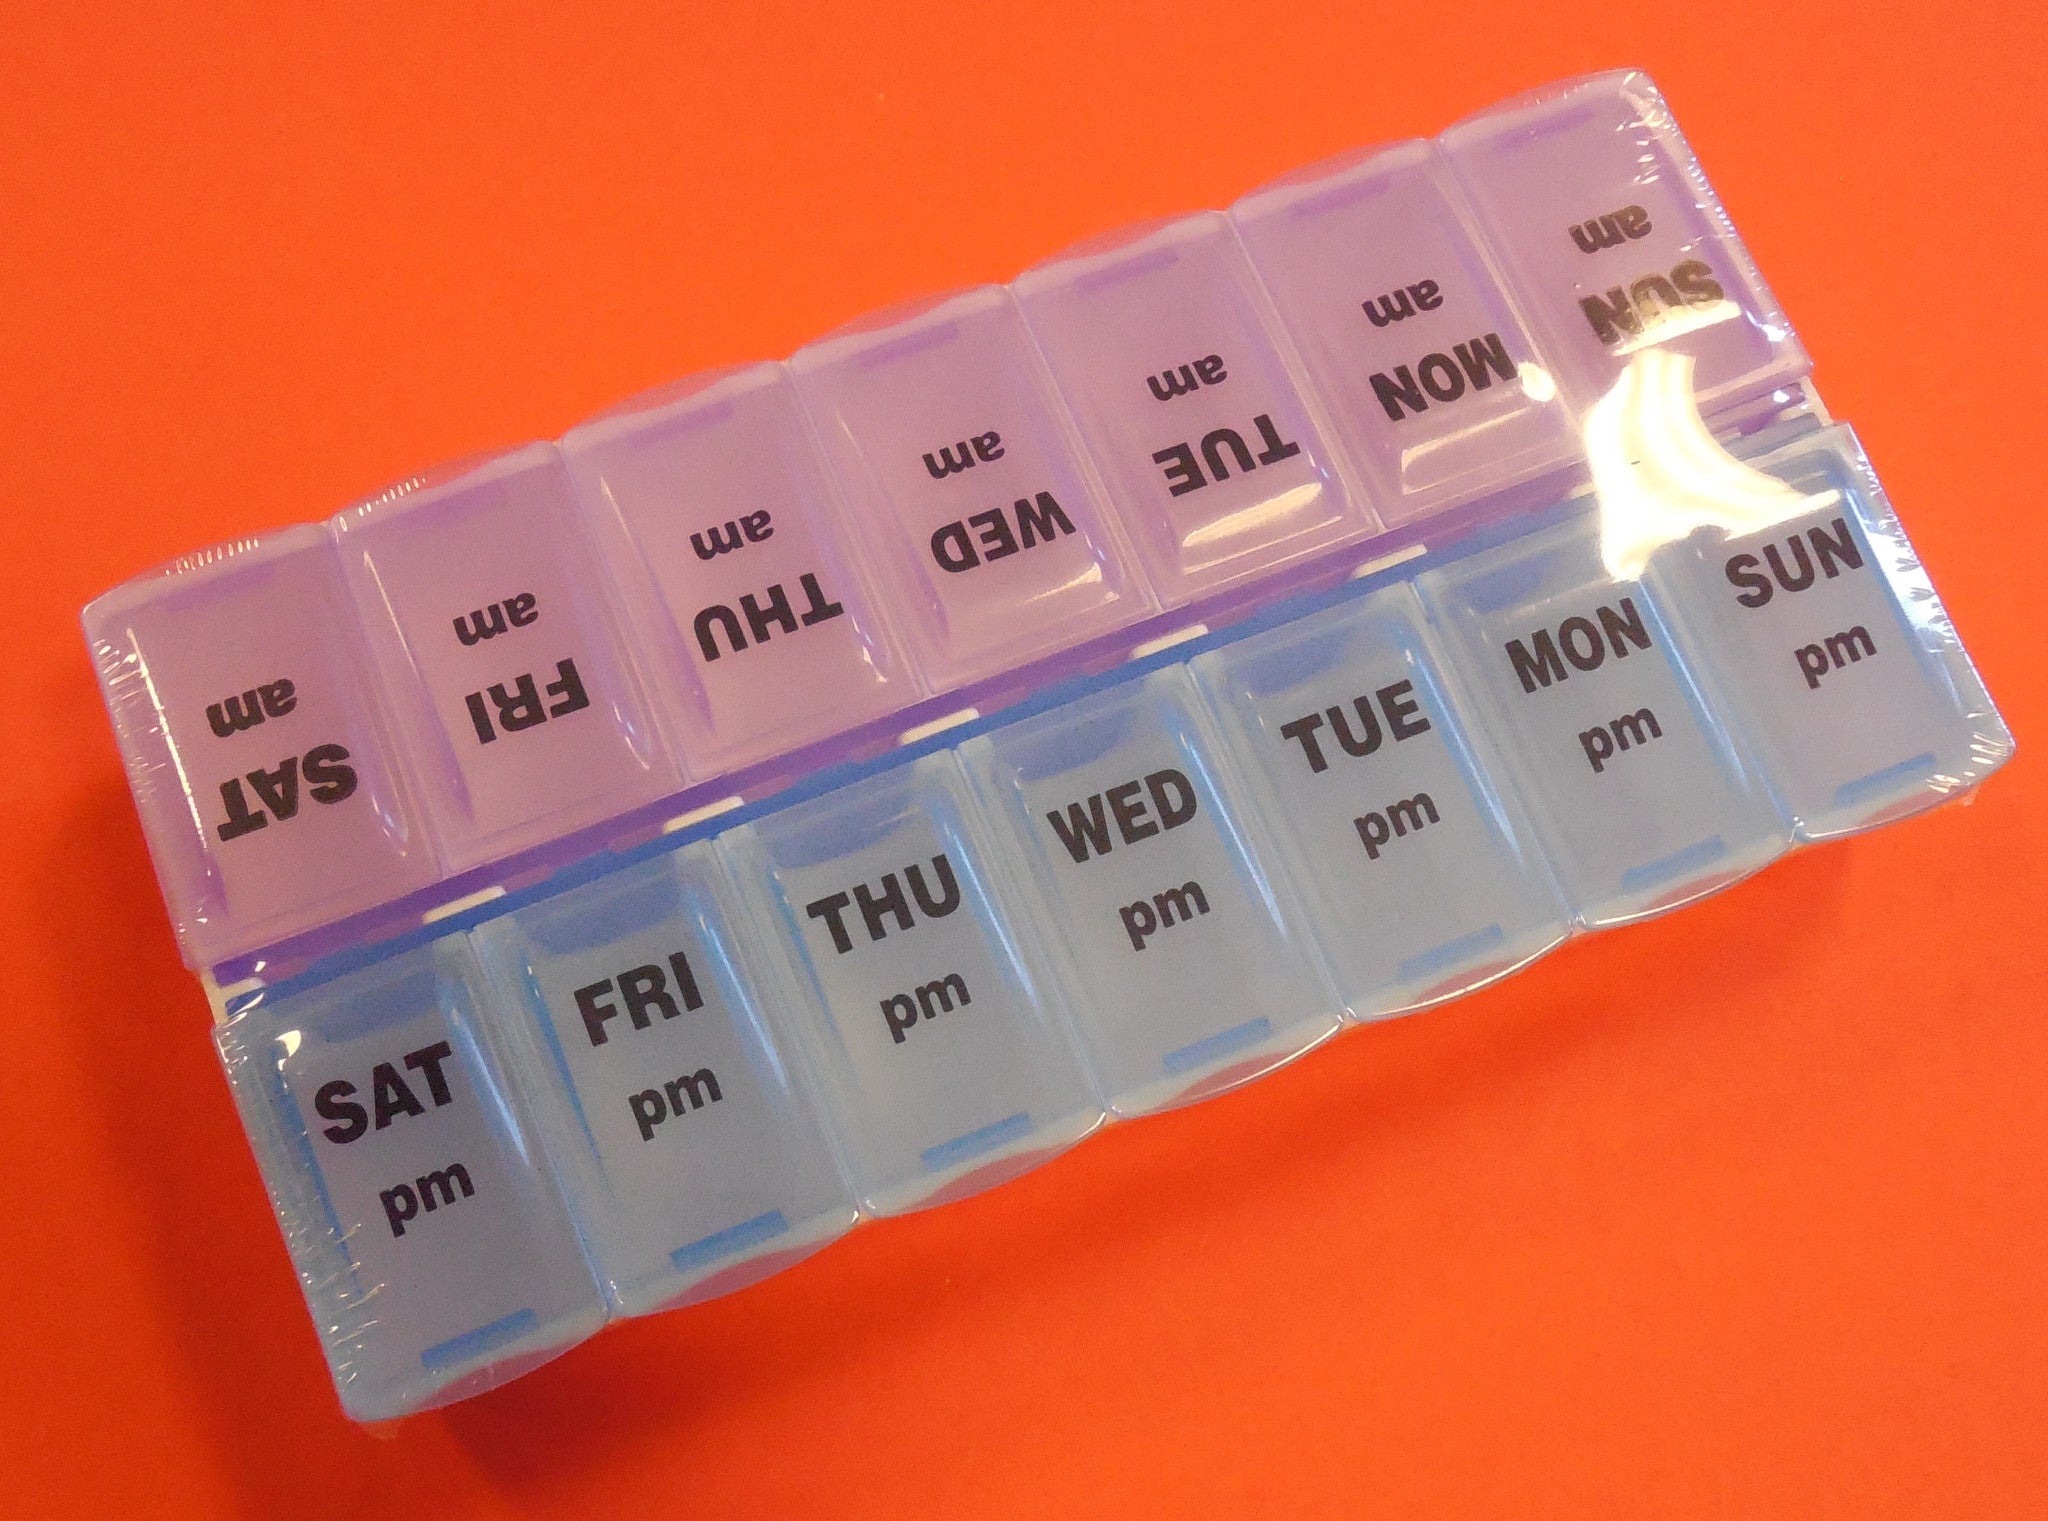 Buy 7 Day Pill Organizer for USD 9.50